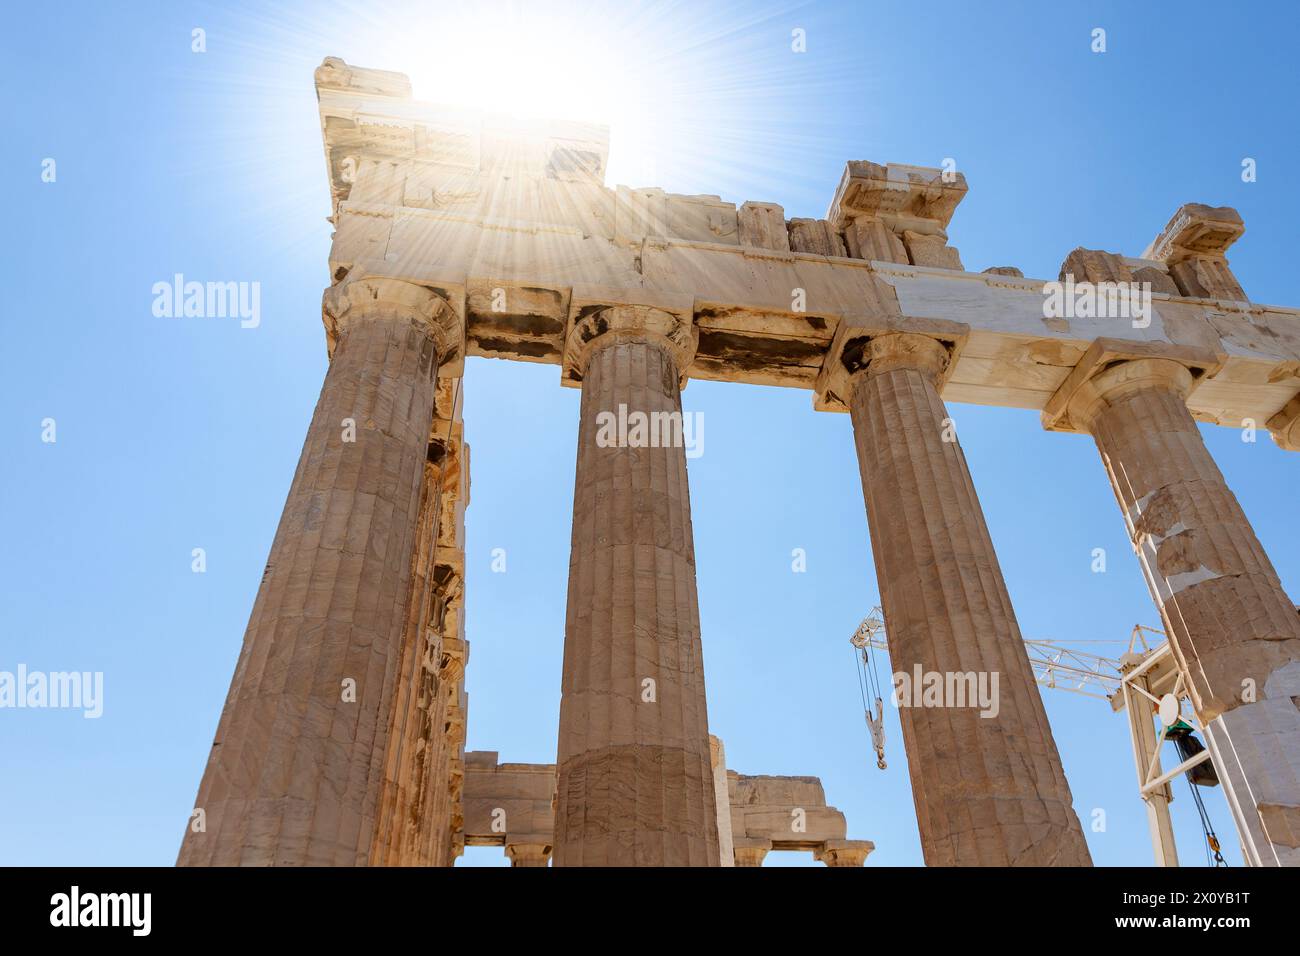 Parthenon, the most emblematic ancient temple in Athens, Greece, a symbol of culture and democracy all across the world. Stock Photo